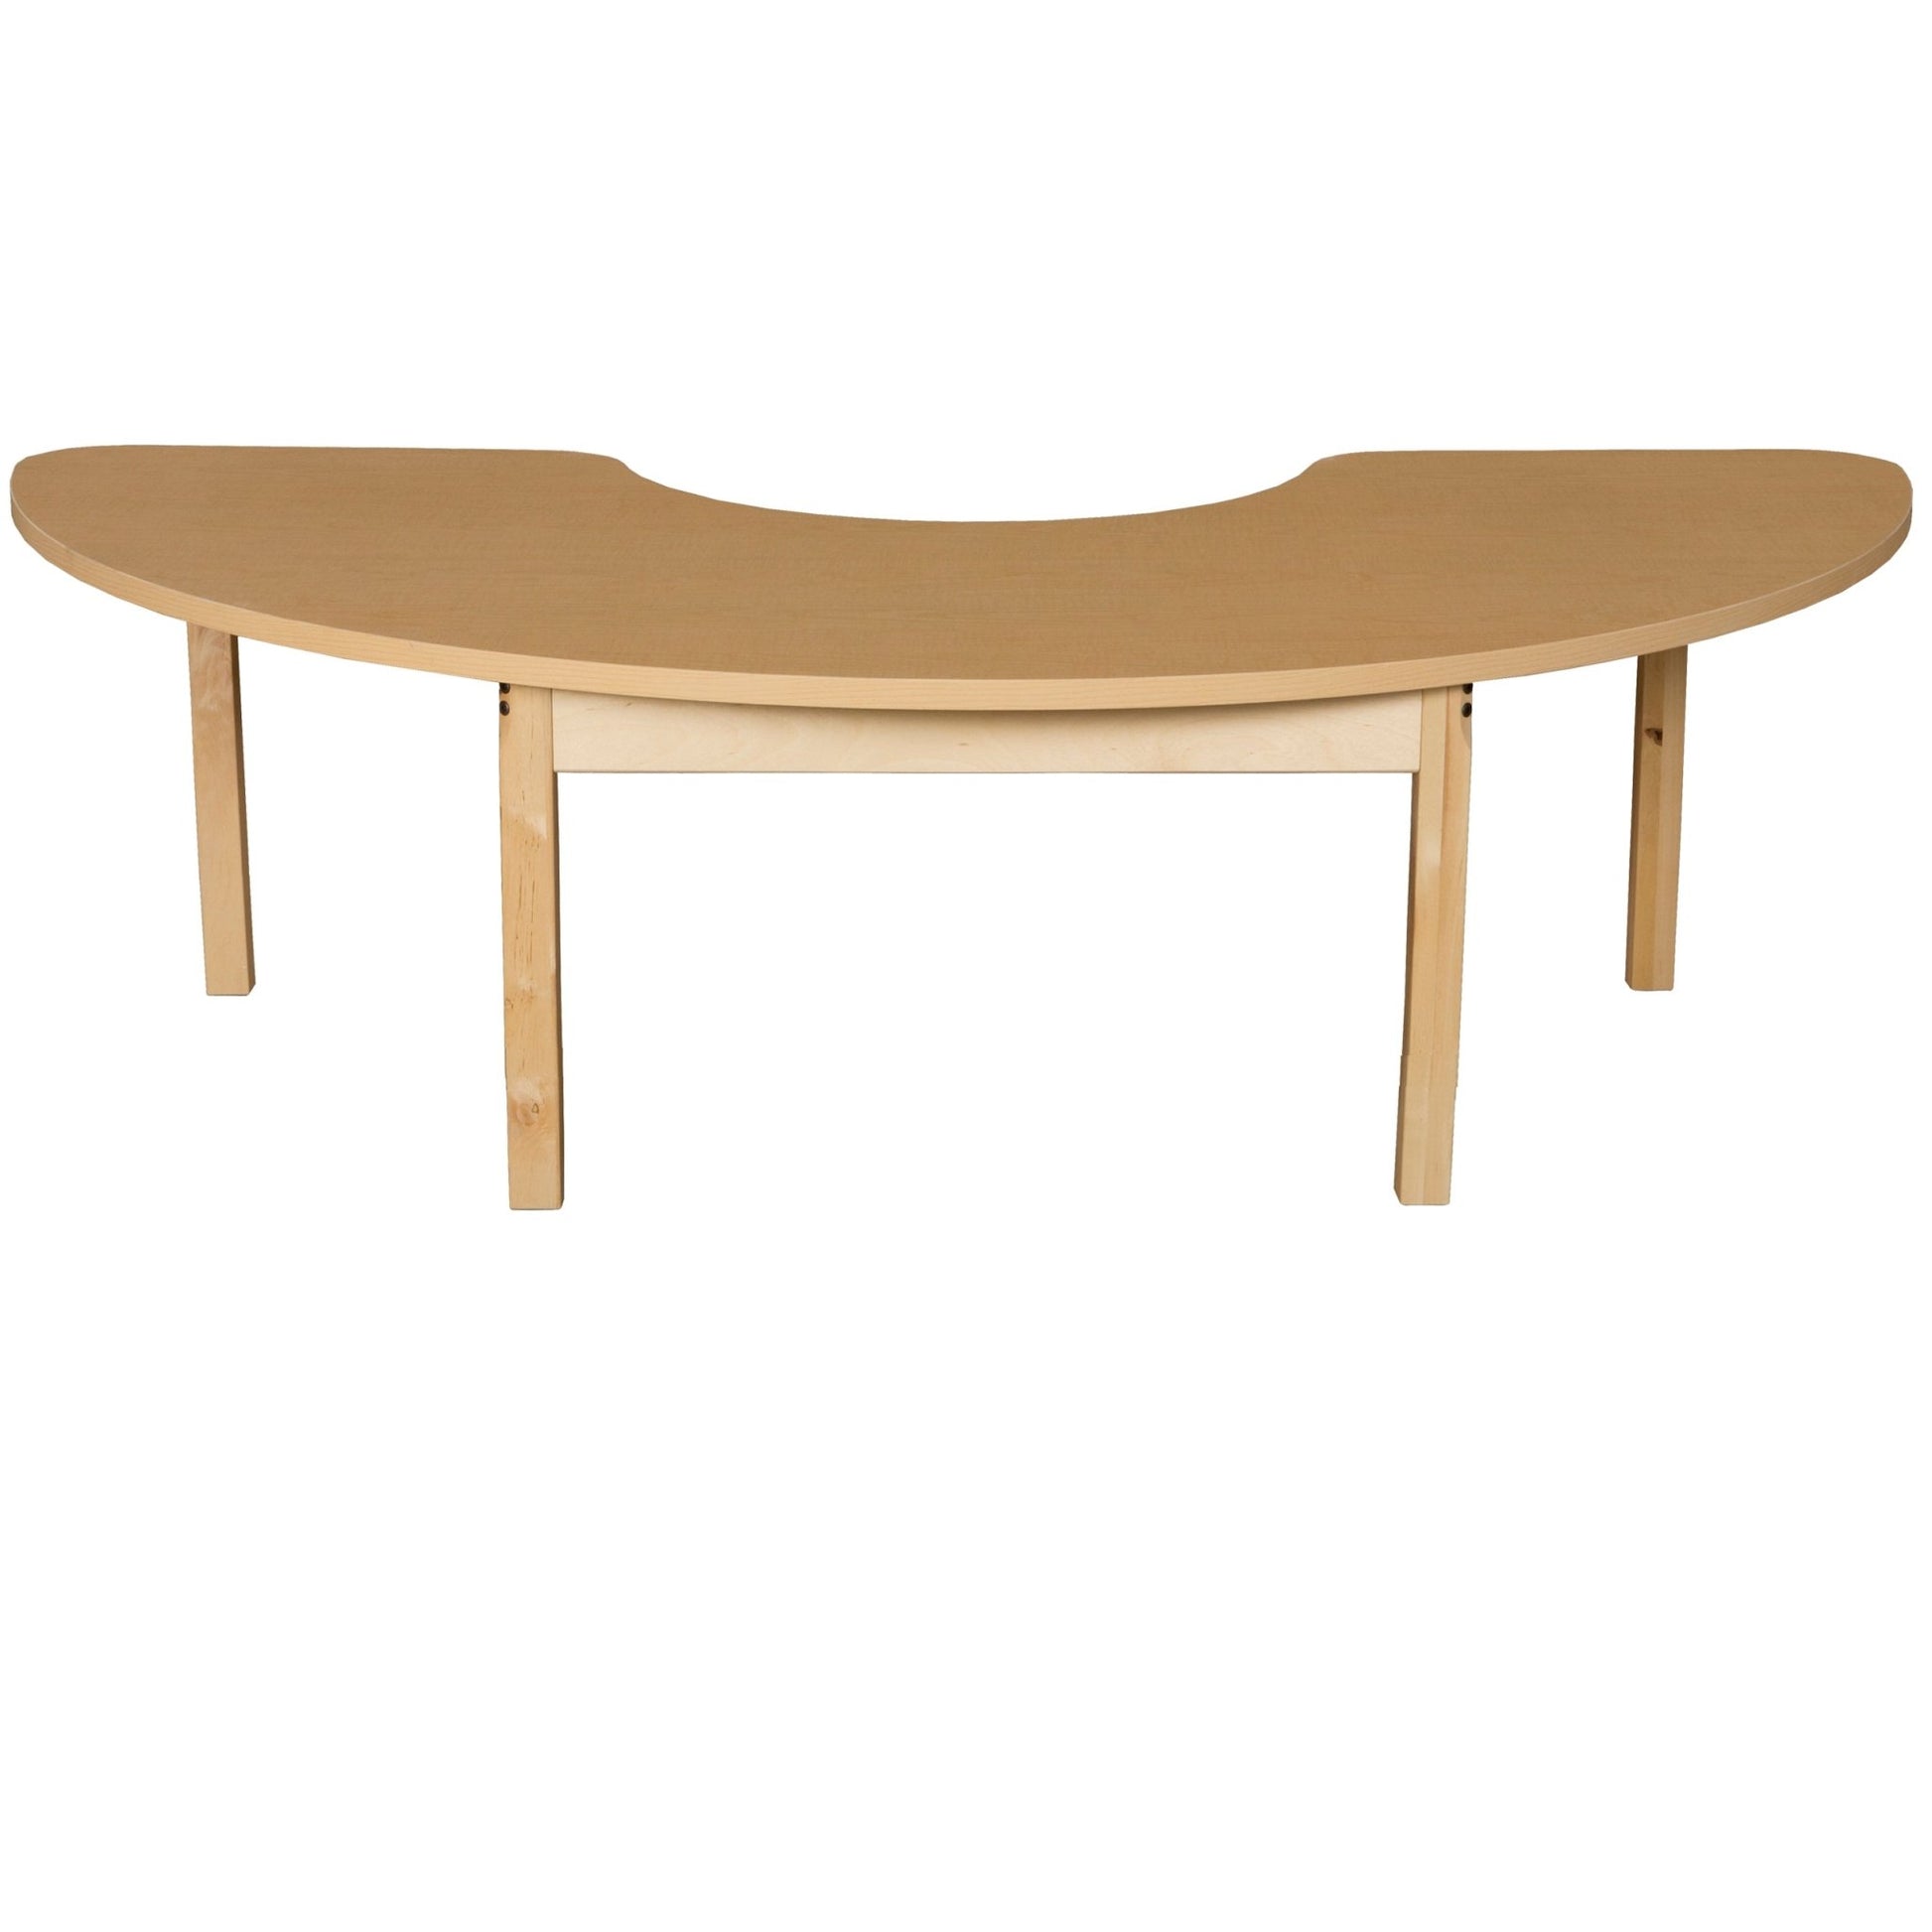 Wood Designs 22" x 64" Half Circle High Pressure Laminate Table with Hardwood Legs 14" - (HPL2264HCRC14) - SchoolOutlet